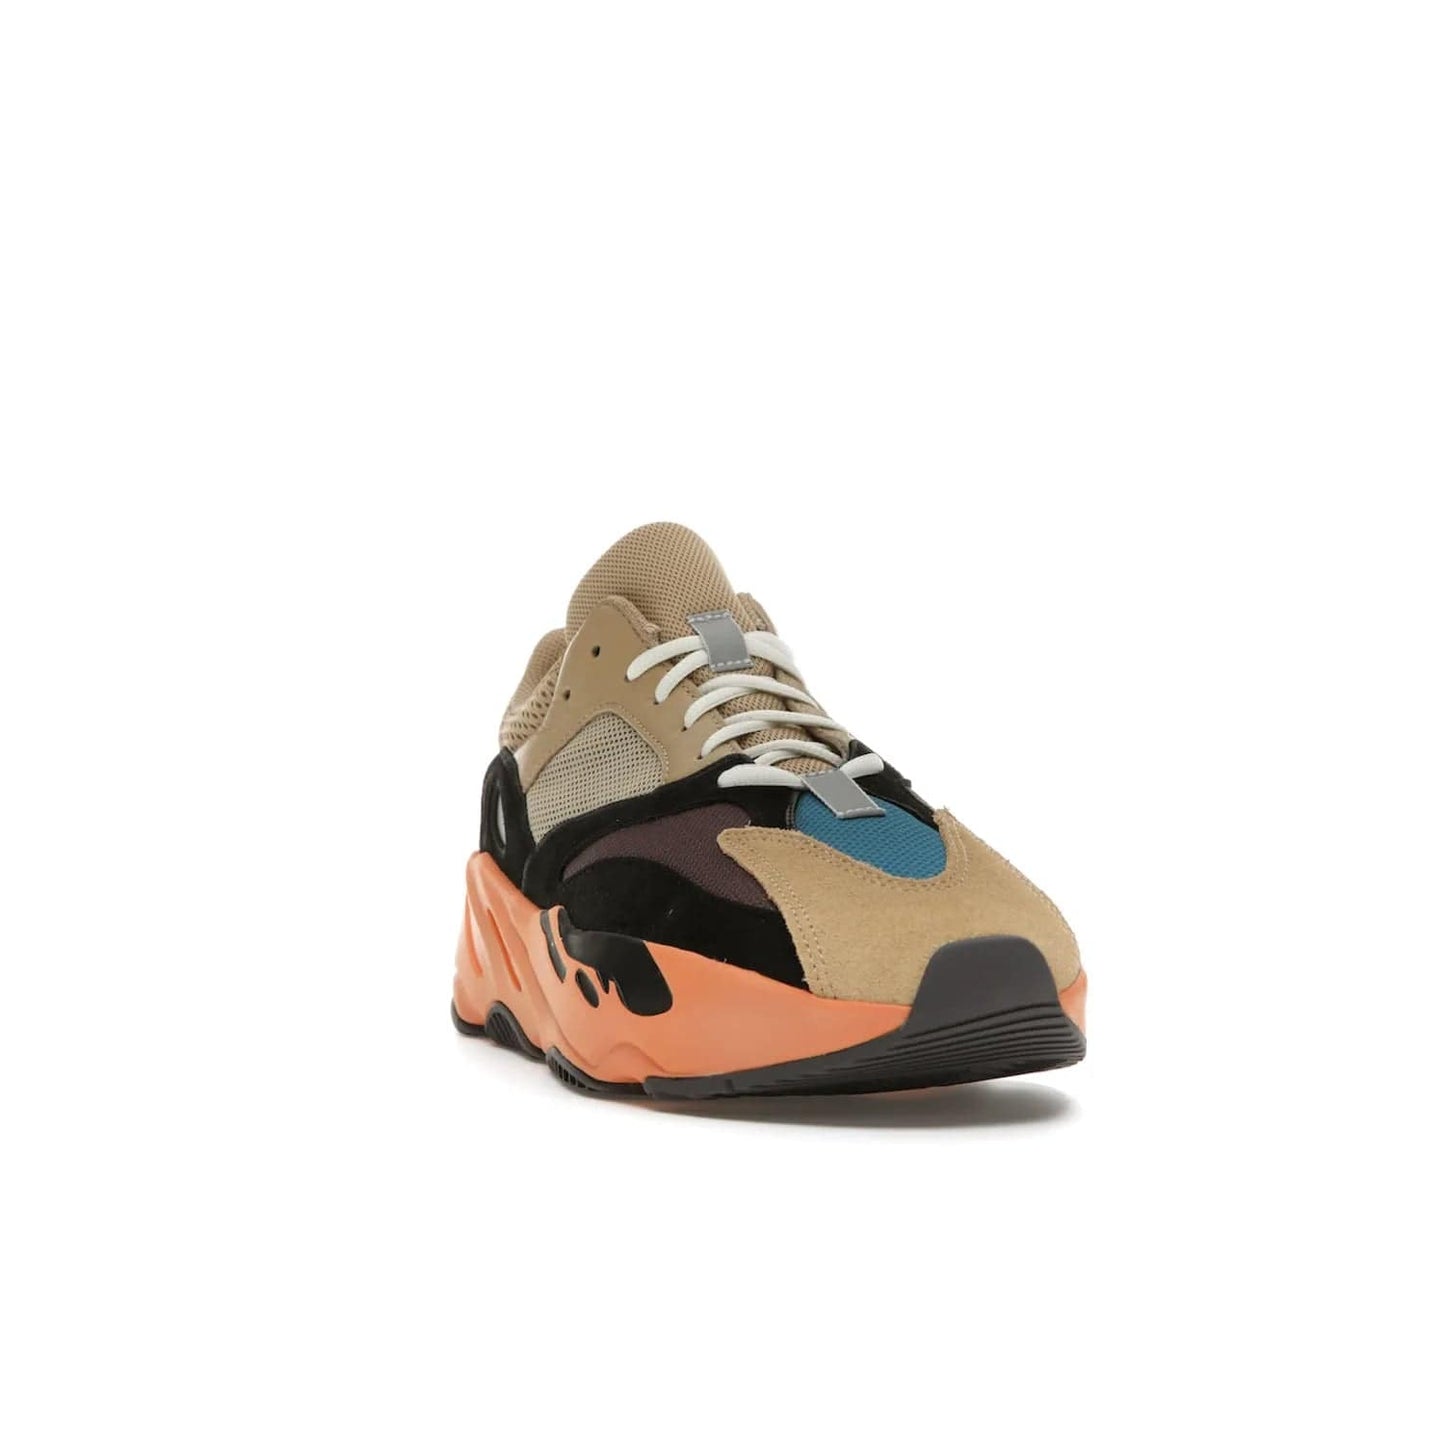 adidas Yeezy Boost 700 Enflame Amber - Image 8 - Only at www.BallersClubKickz.com - Adidas Yeezy Boost 700 Enflame Amber: Eye-catching design with pale yellow, brown, teal, and orange! Get yours in June 2021.